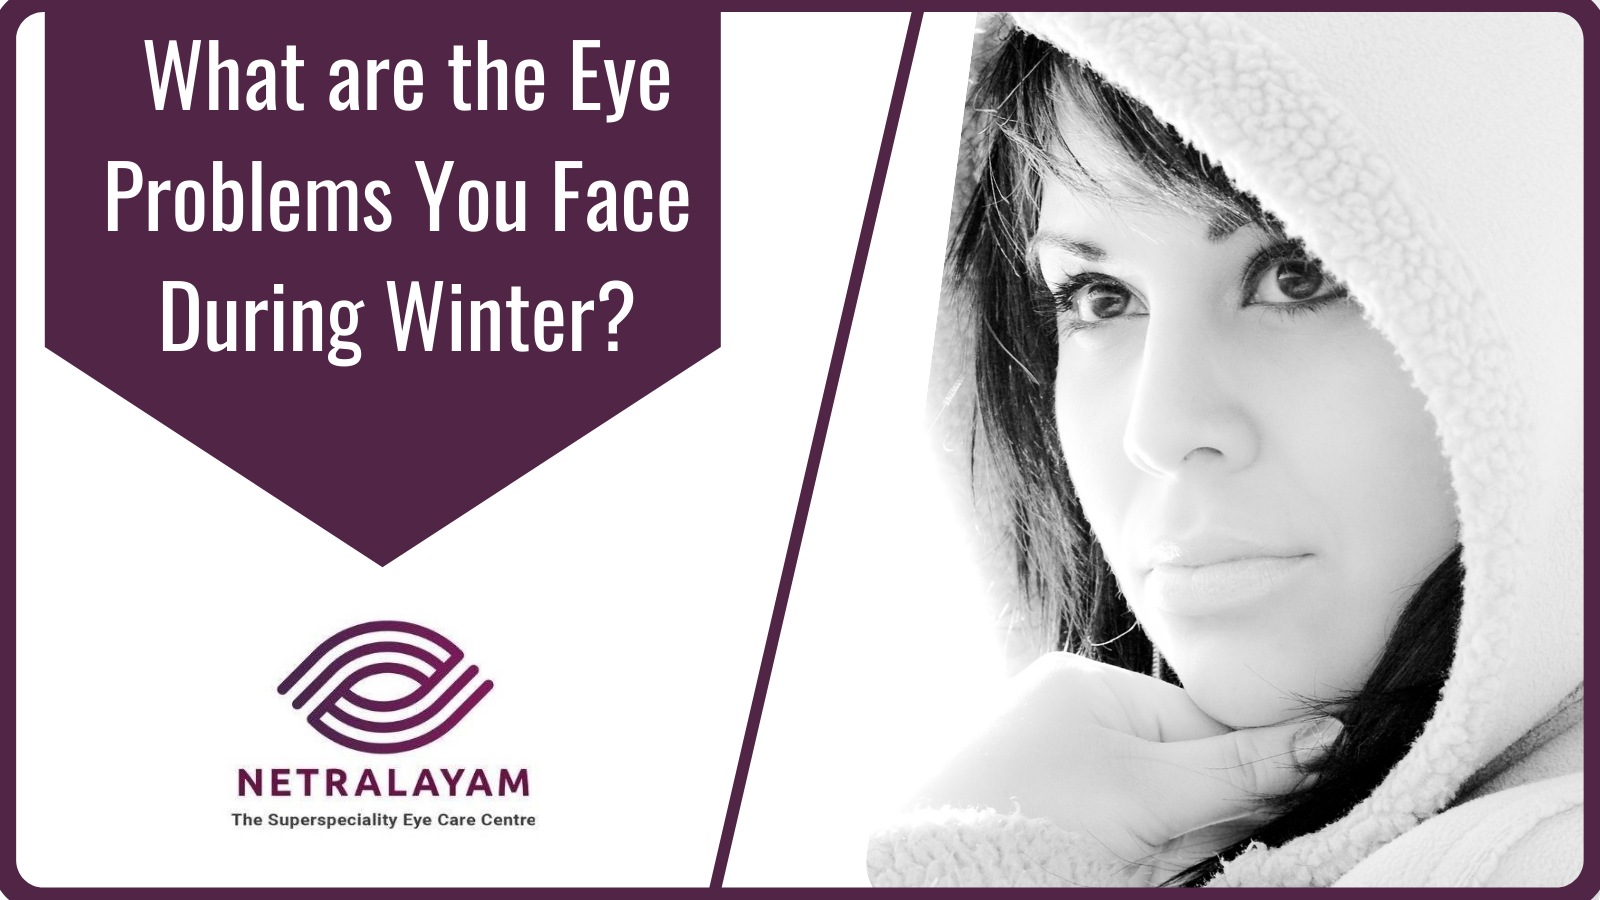  What are the Eye Problems You Face During Winter?